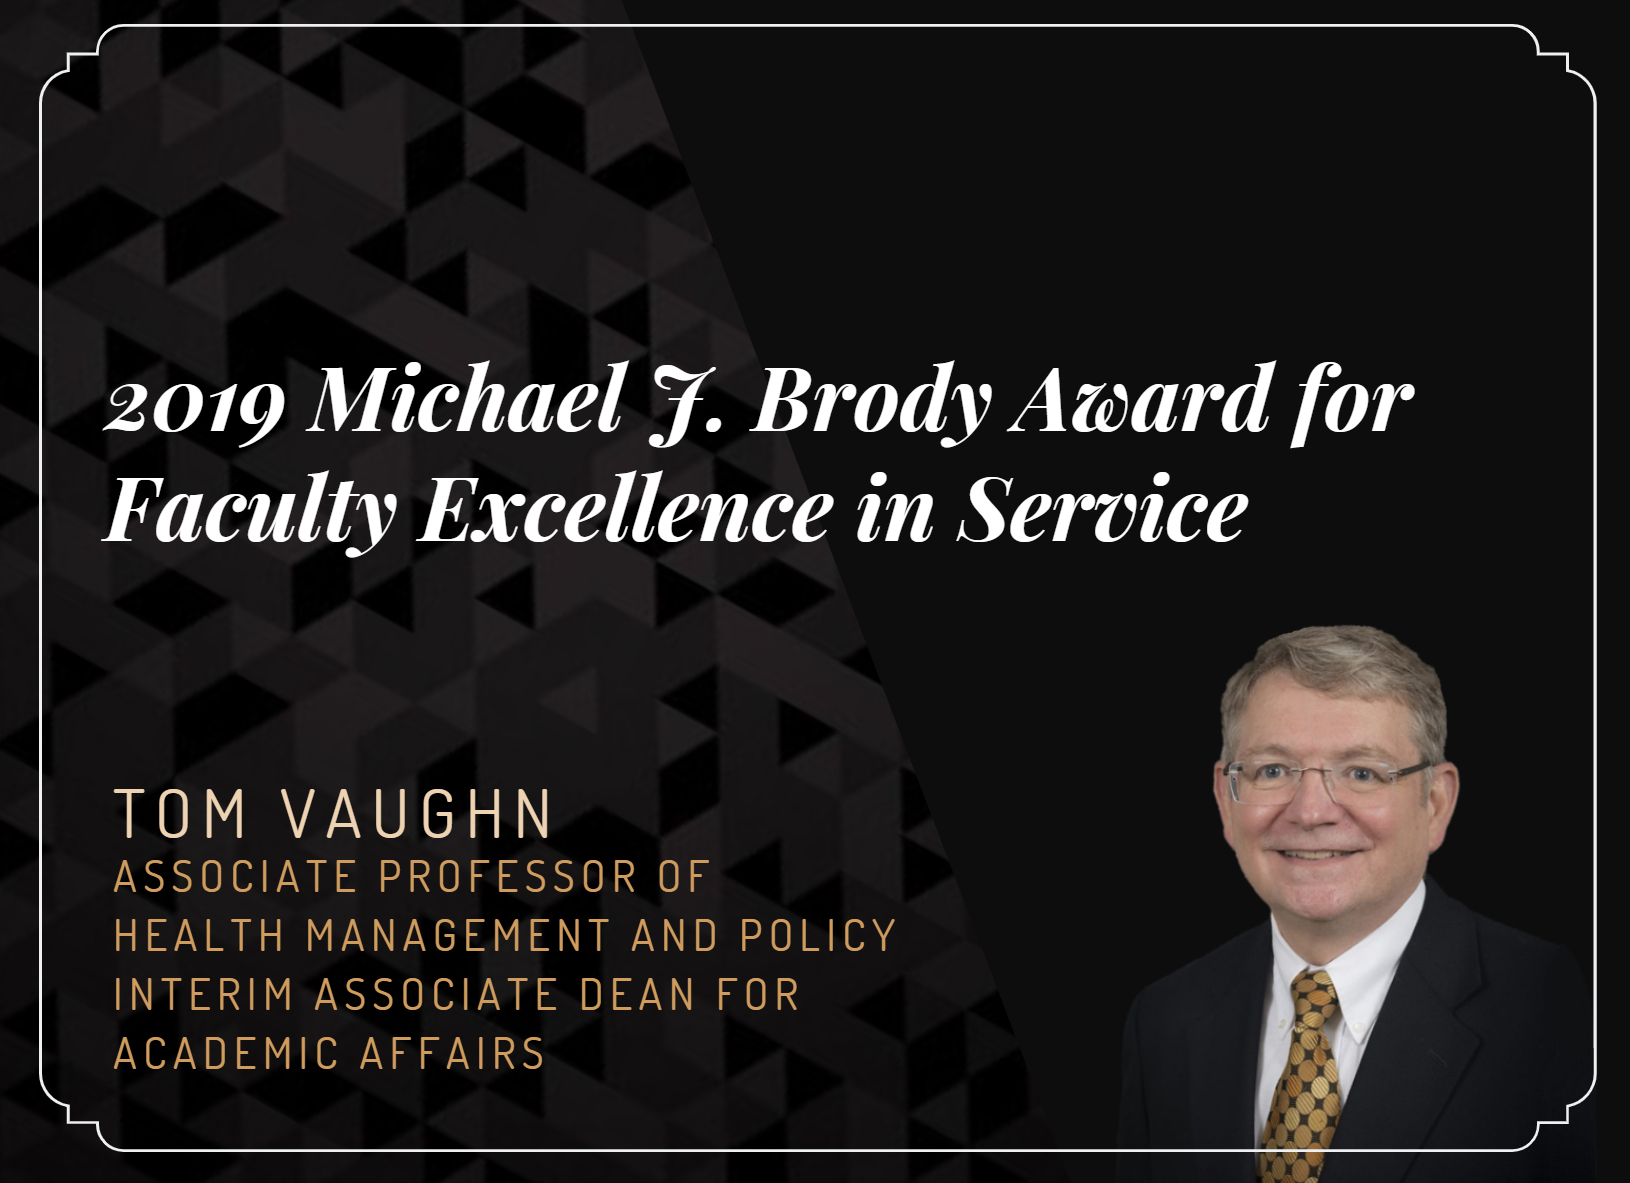 tom vaughn 2019 michael j bropdy award for faculty excellence in service